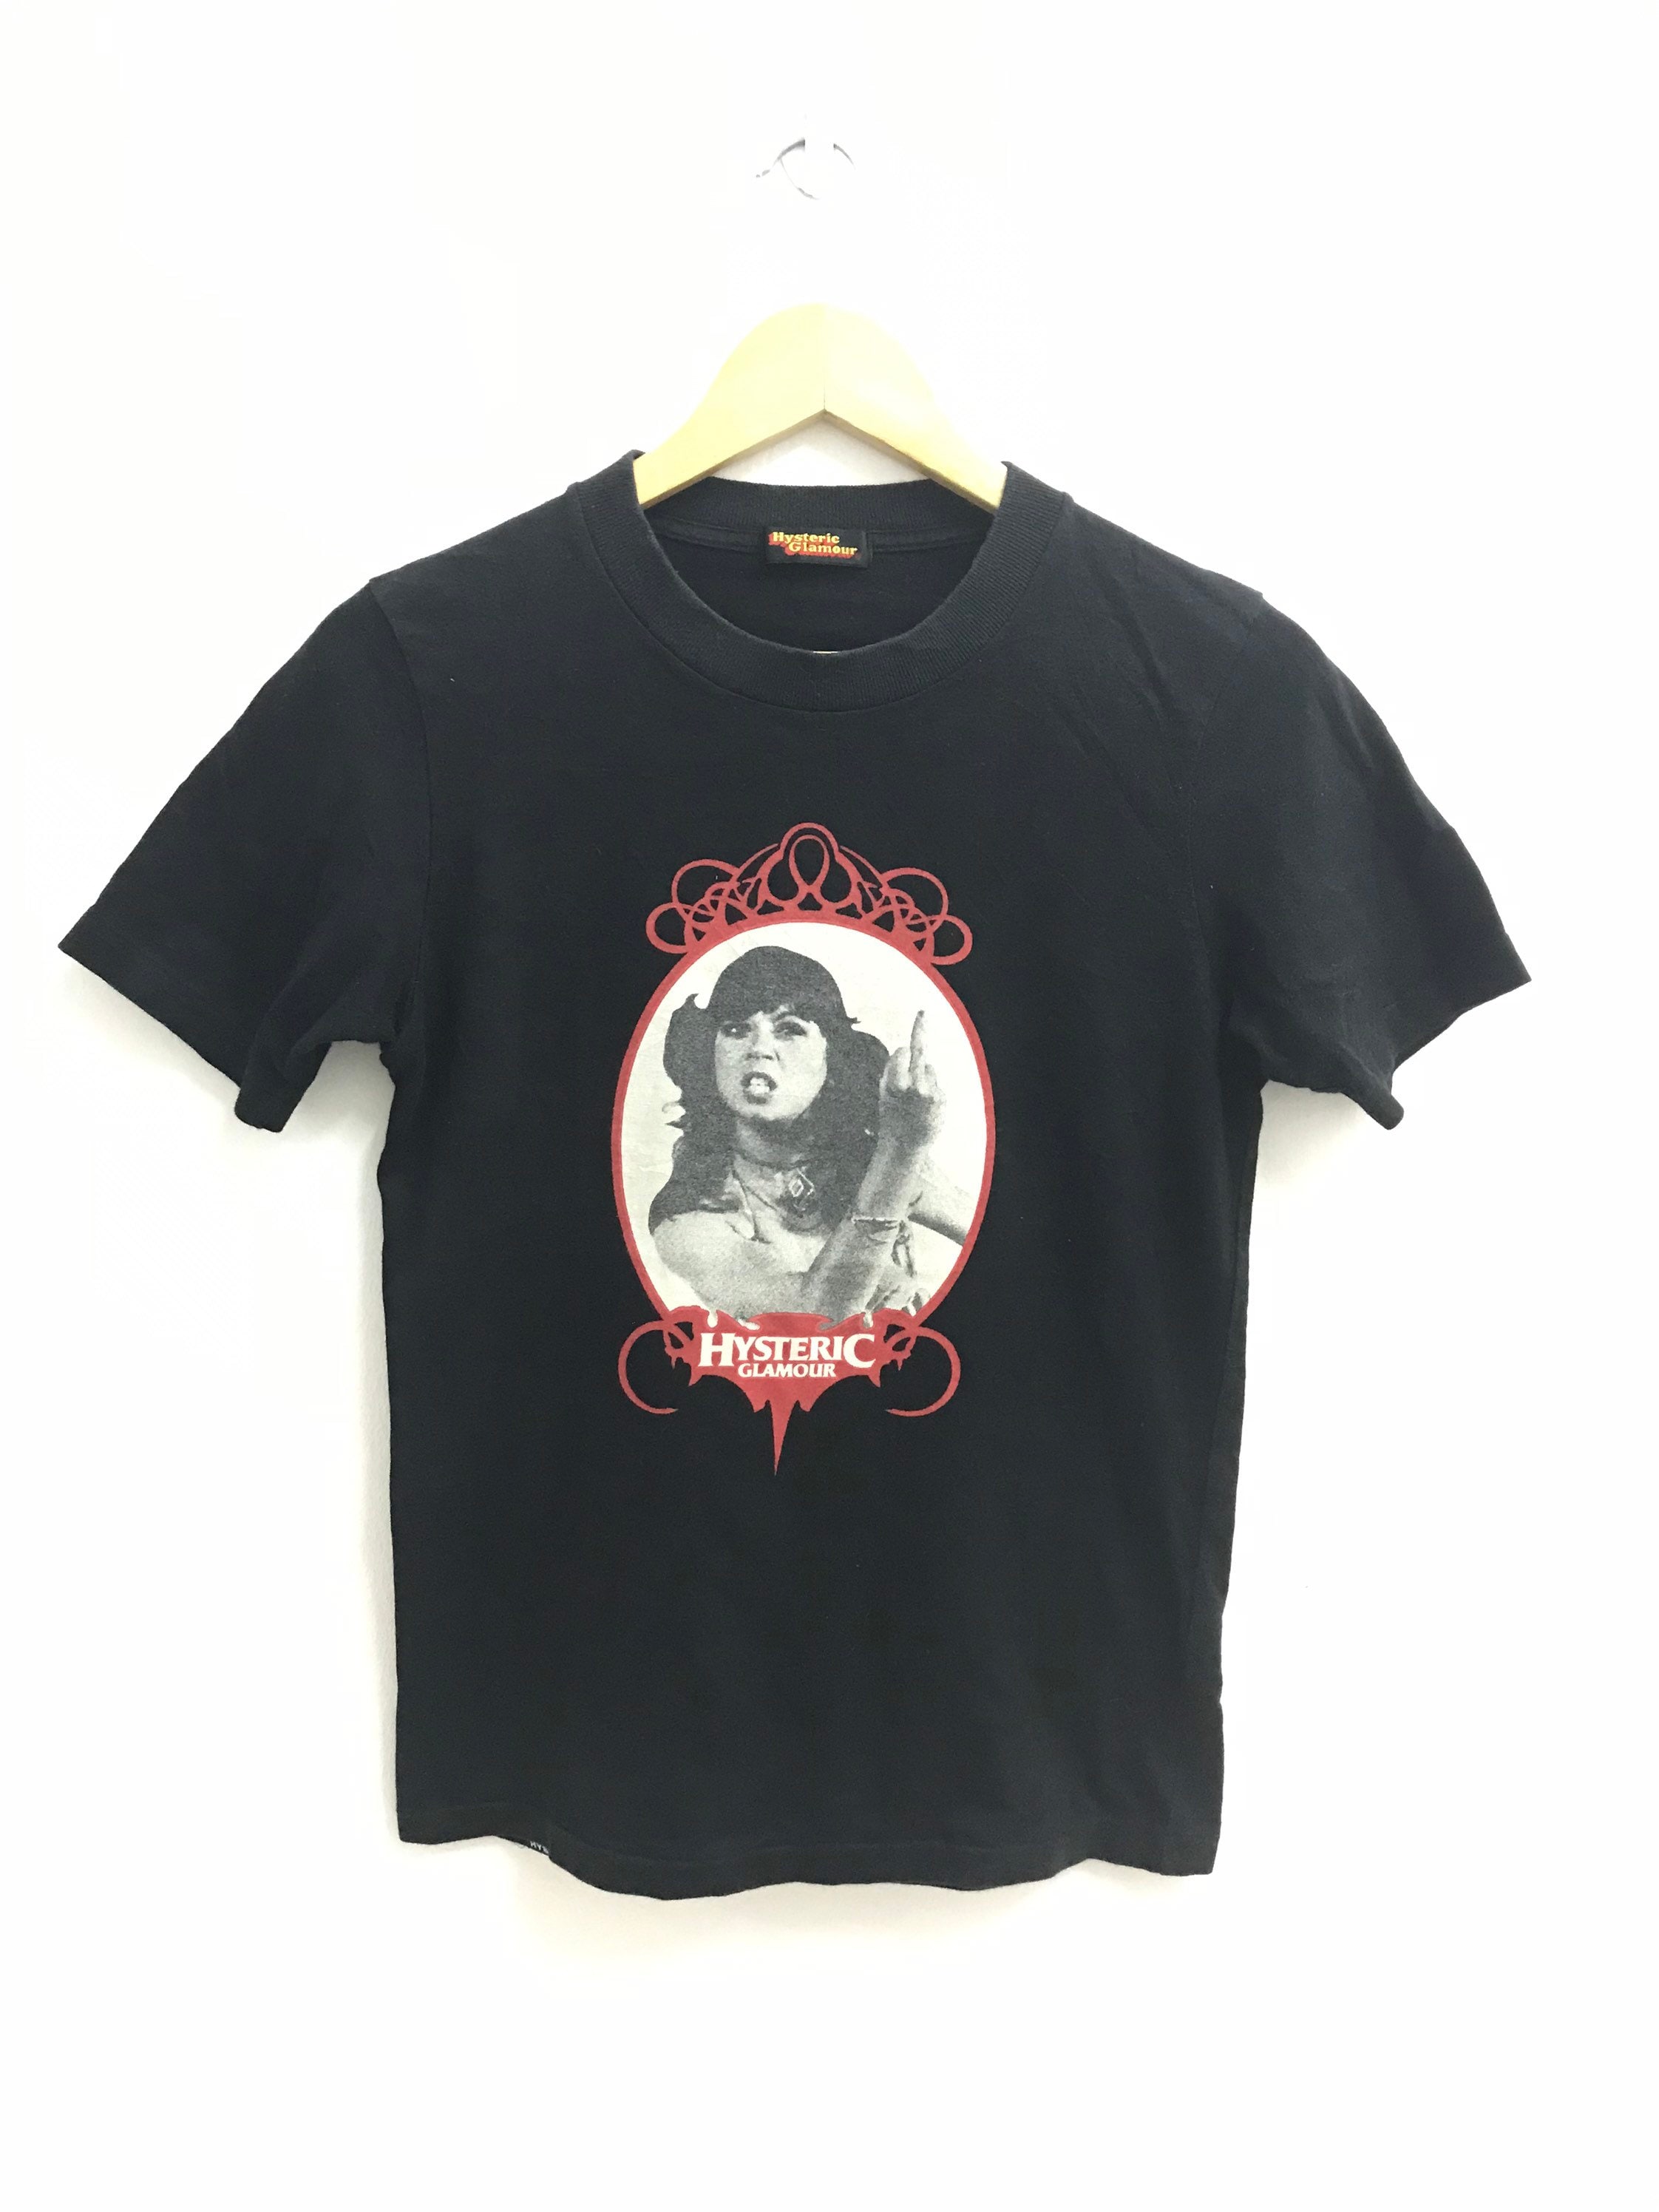 Buy Hysteric Glamour T - Etsy